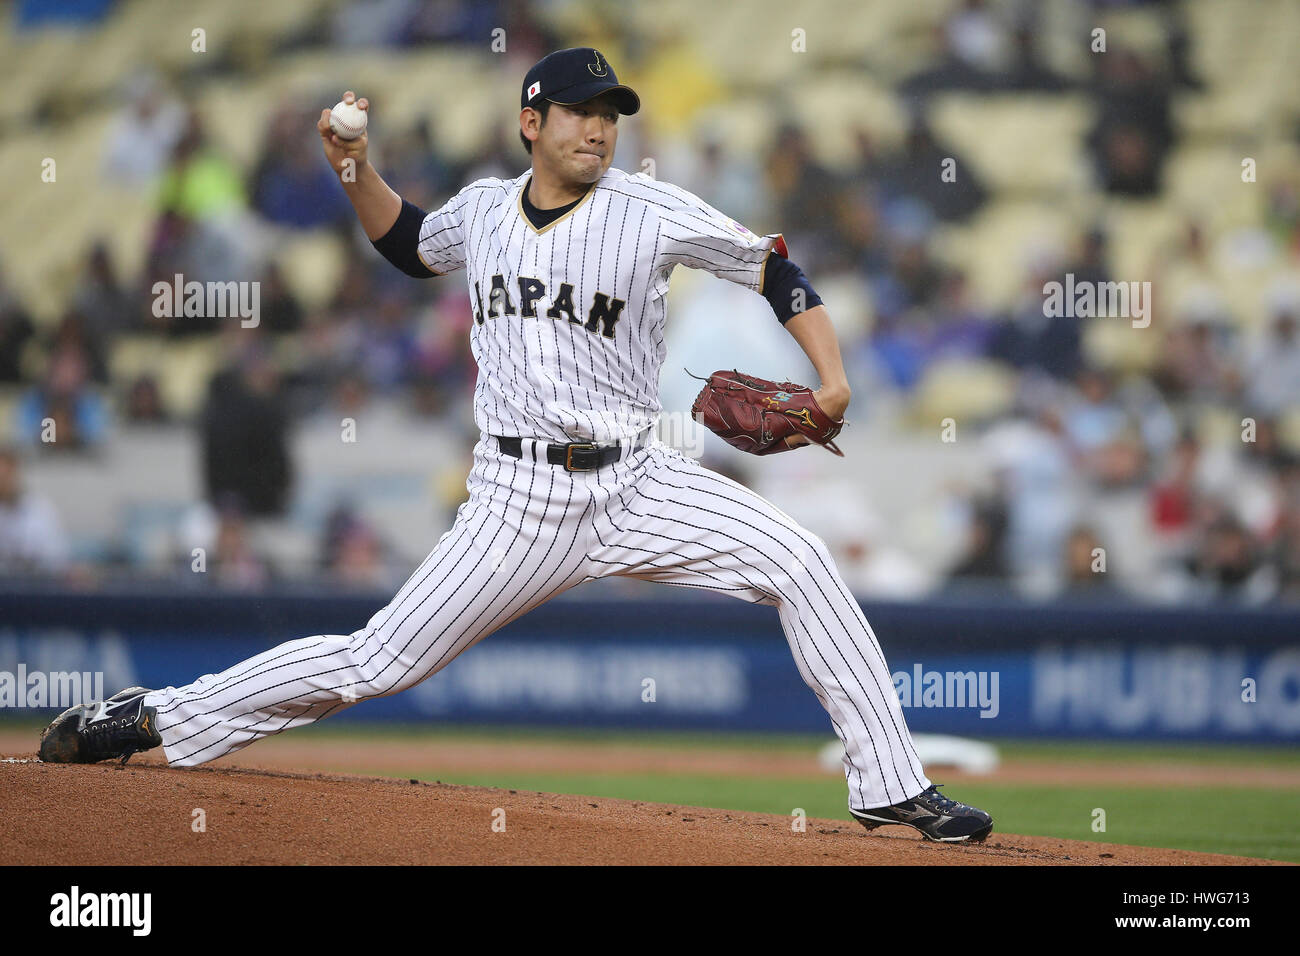 Los Angeles, CA, USA. 21st Mar, 2017. Japan pitcher Tomoyuki Sugano #11 makes the start for Japan in the game between the the United States and Japan, World Baseball Classic Semi-Finals, Dodger Stadium in Los Angeles, CA. Peter Joneleit /CSM/Alamy Live News Stock Photo